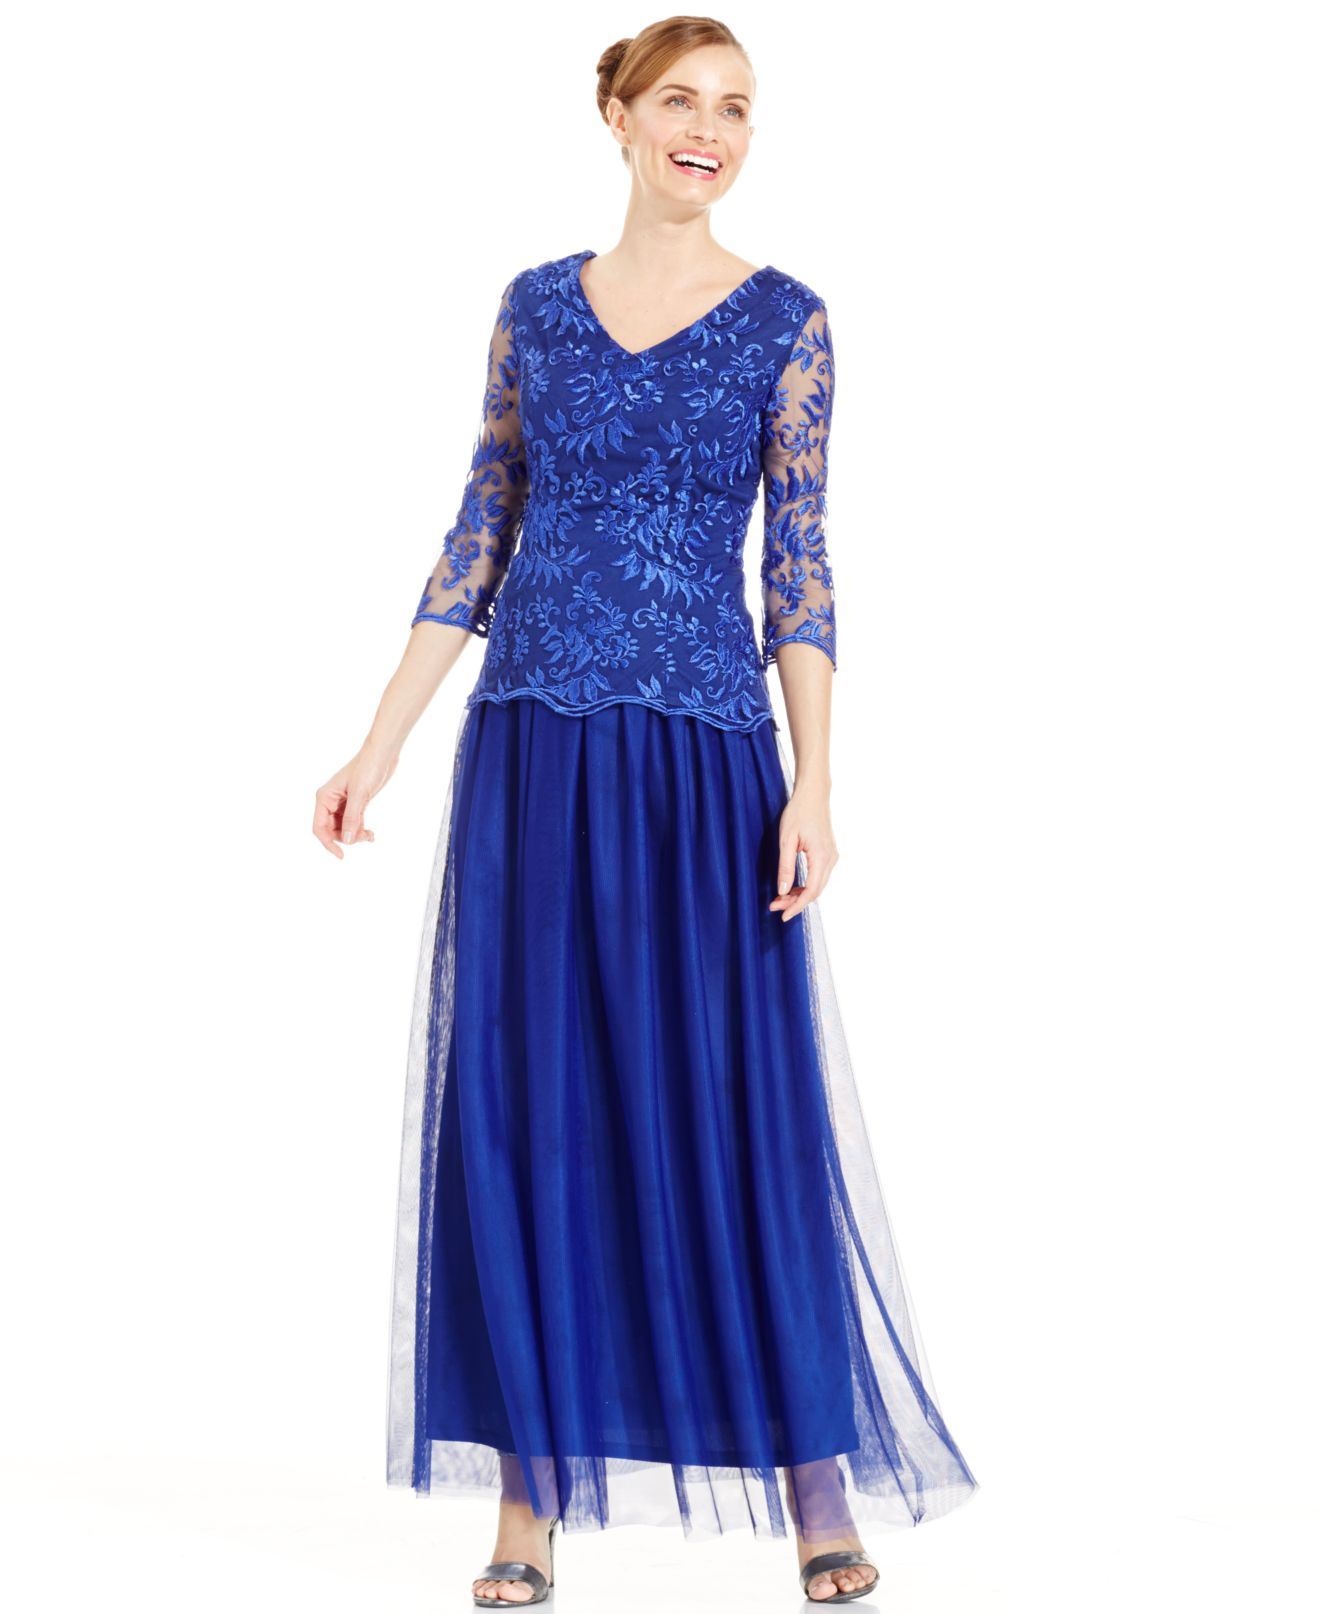 Lyst - Alex Evenings Embroidered Popover Gown in Blue